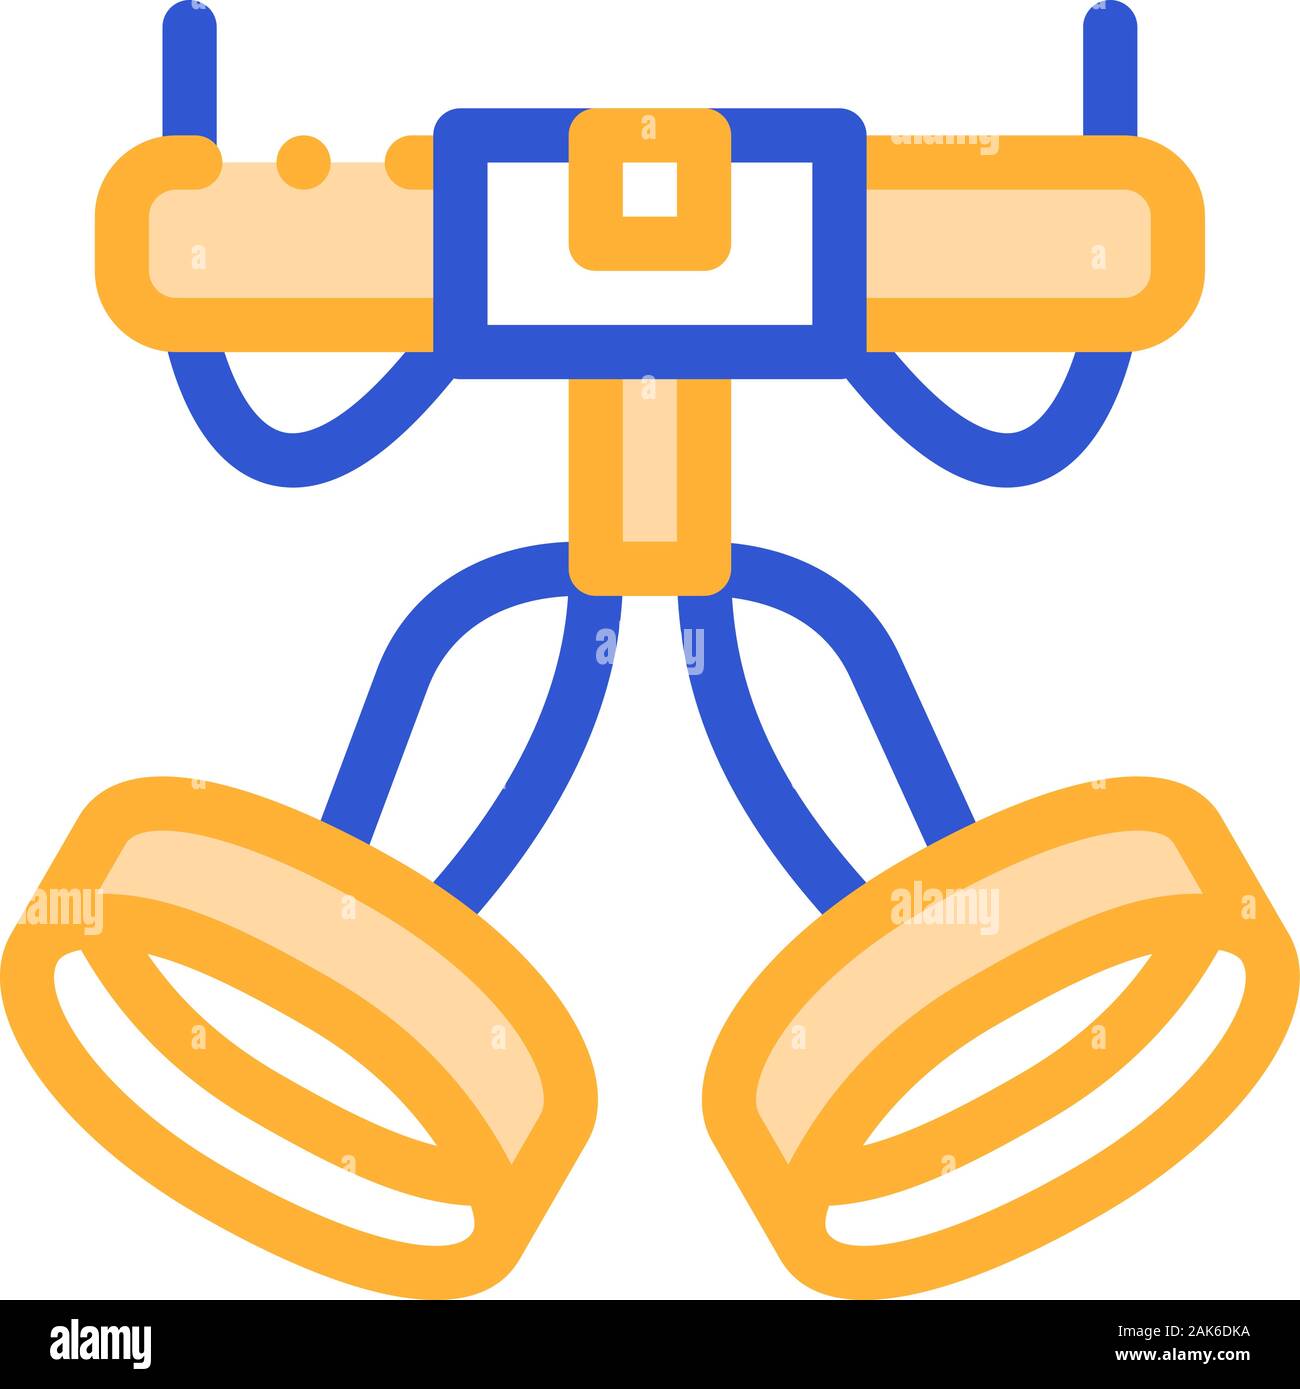 Harness Alpinism Hooking Device Tool Vector Icon Stock Vector